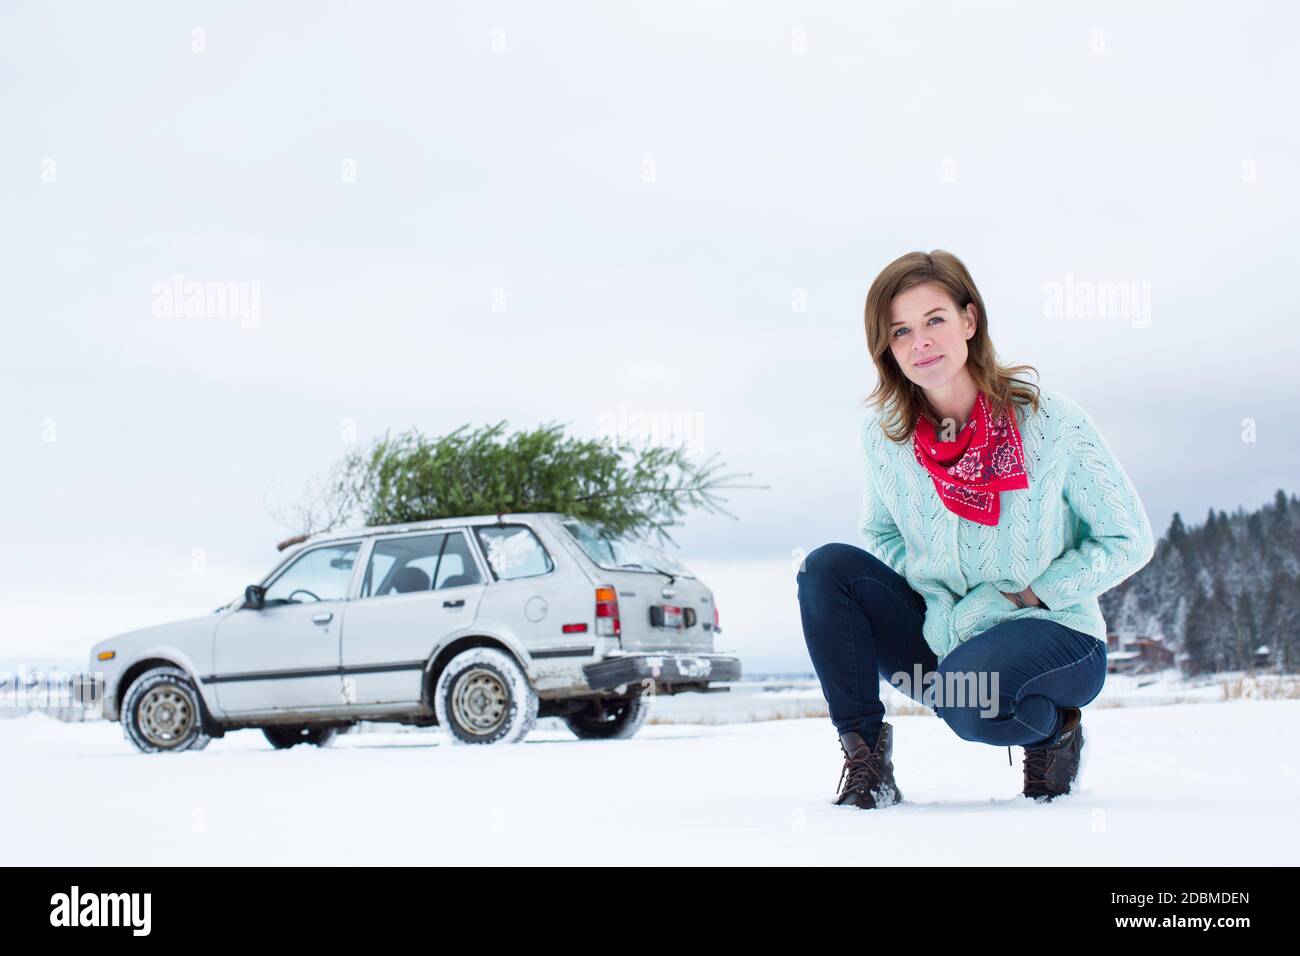 Portrait of woman in winter scene with tiny car and christmas tree Stock Photo